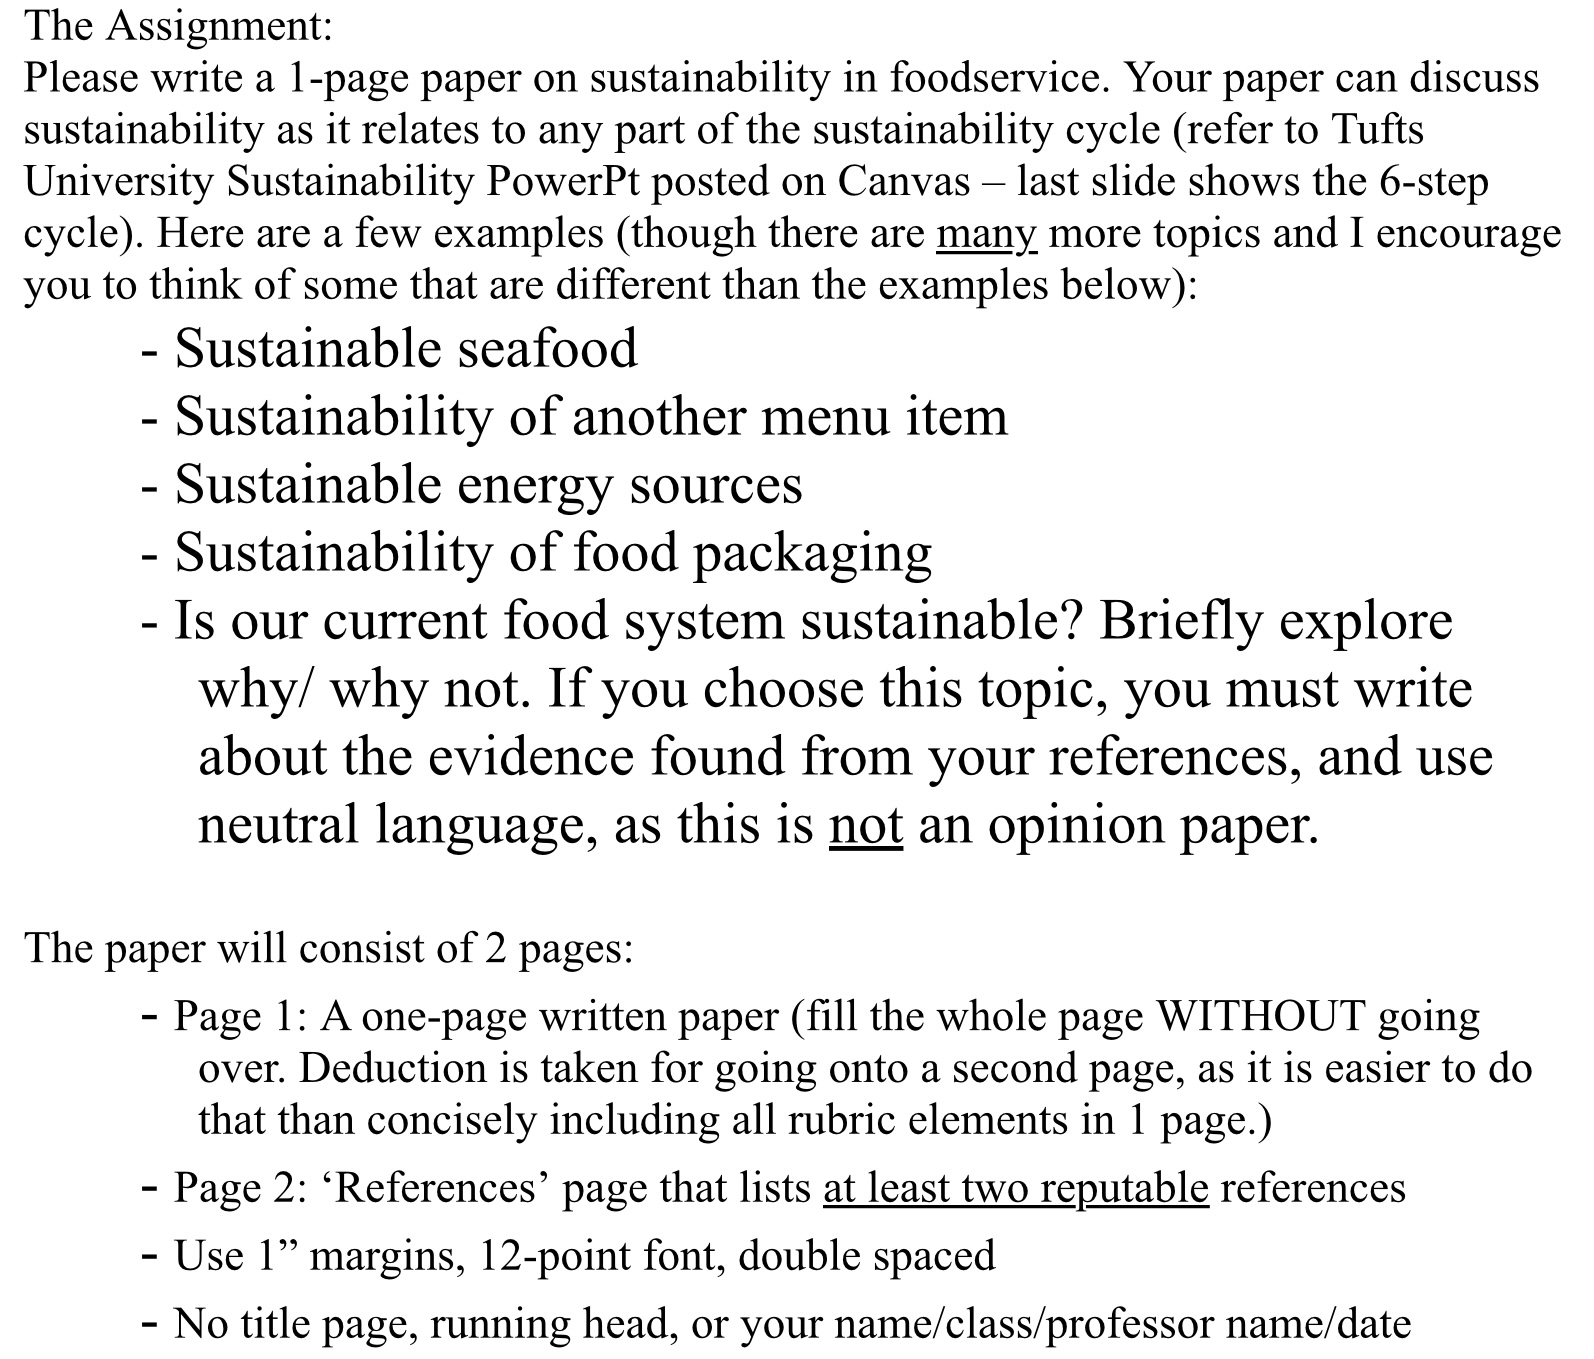 The Assignment: Please write a 1-page paper on sustainability in foodservice. Your paper can discuss